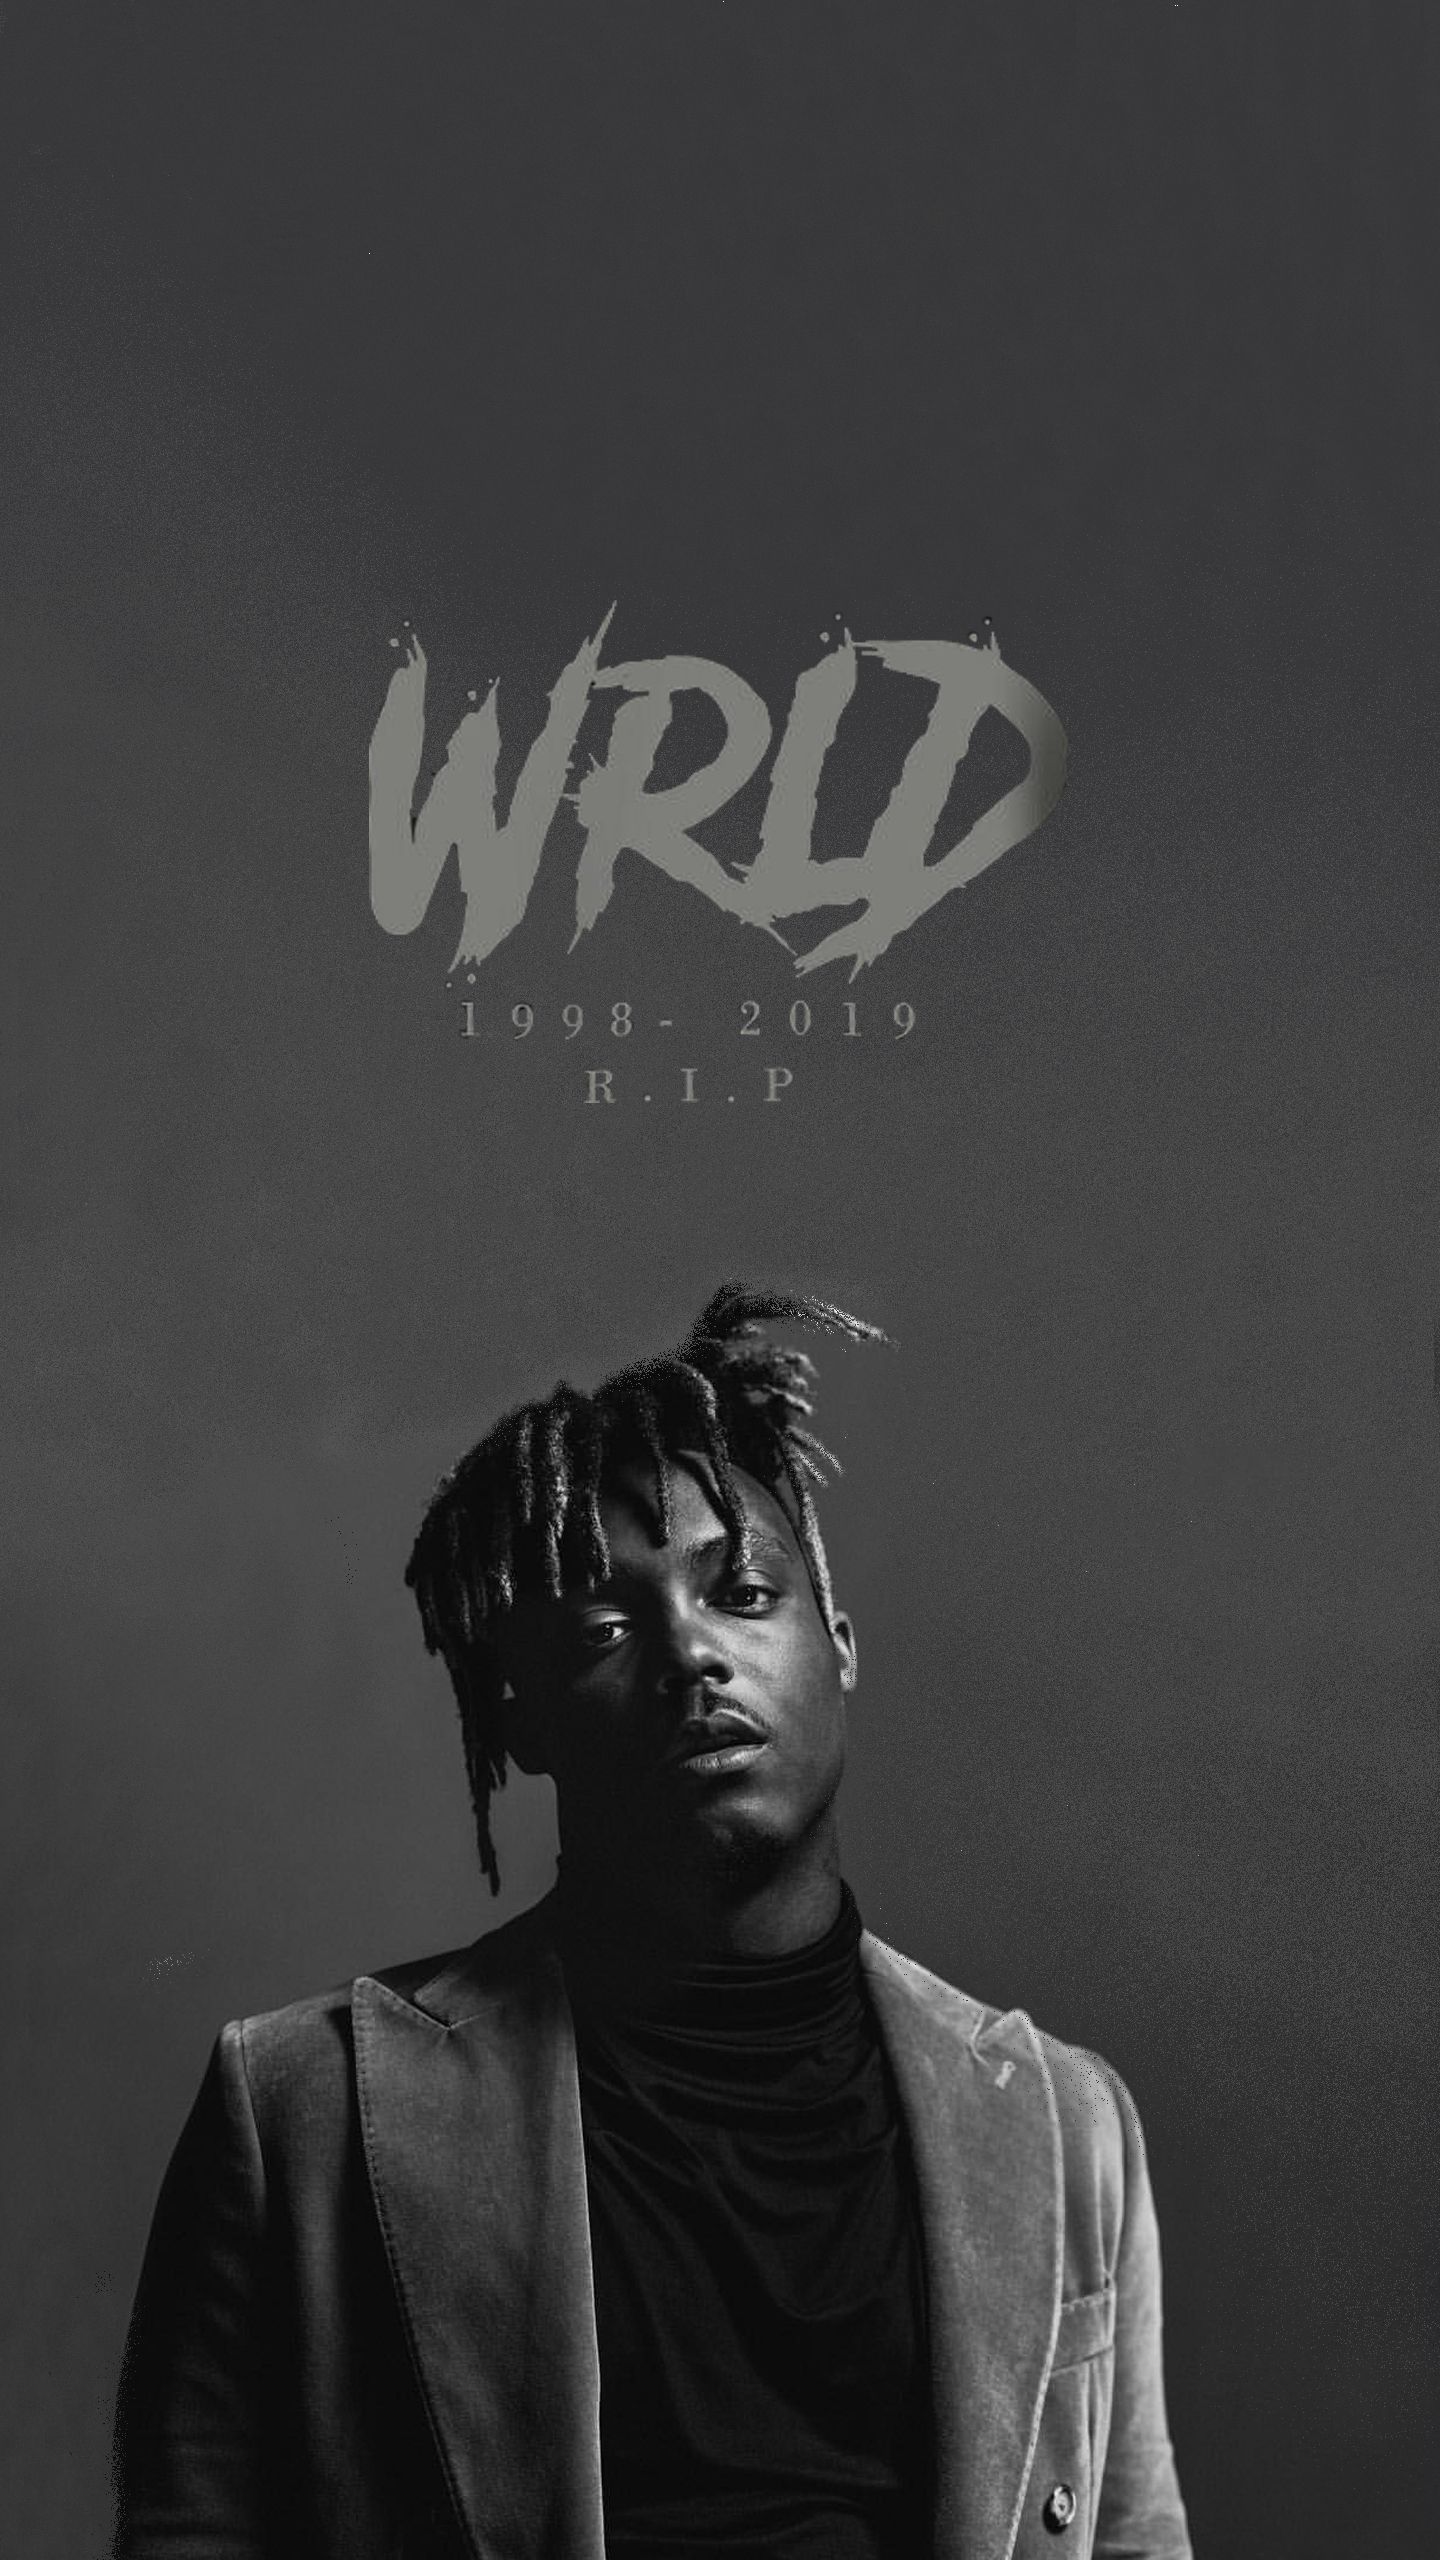 Juice Wrld Wallpaper. Rap wallpaper, Black and white aesthetic, Black and white picture wall